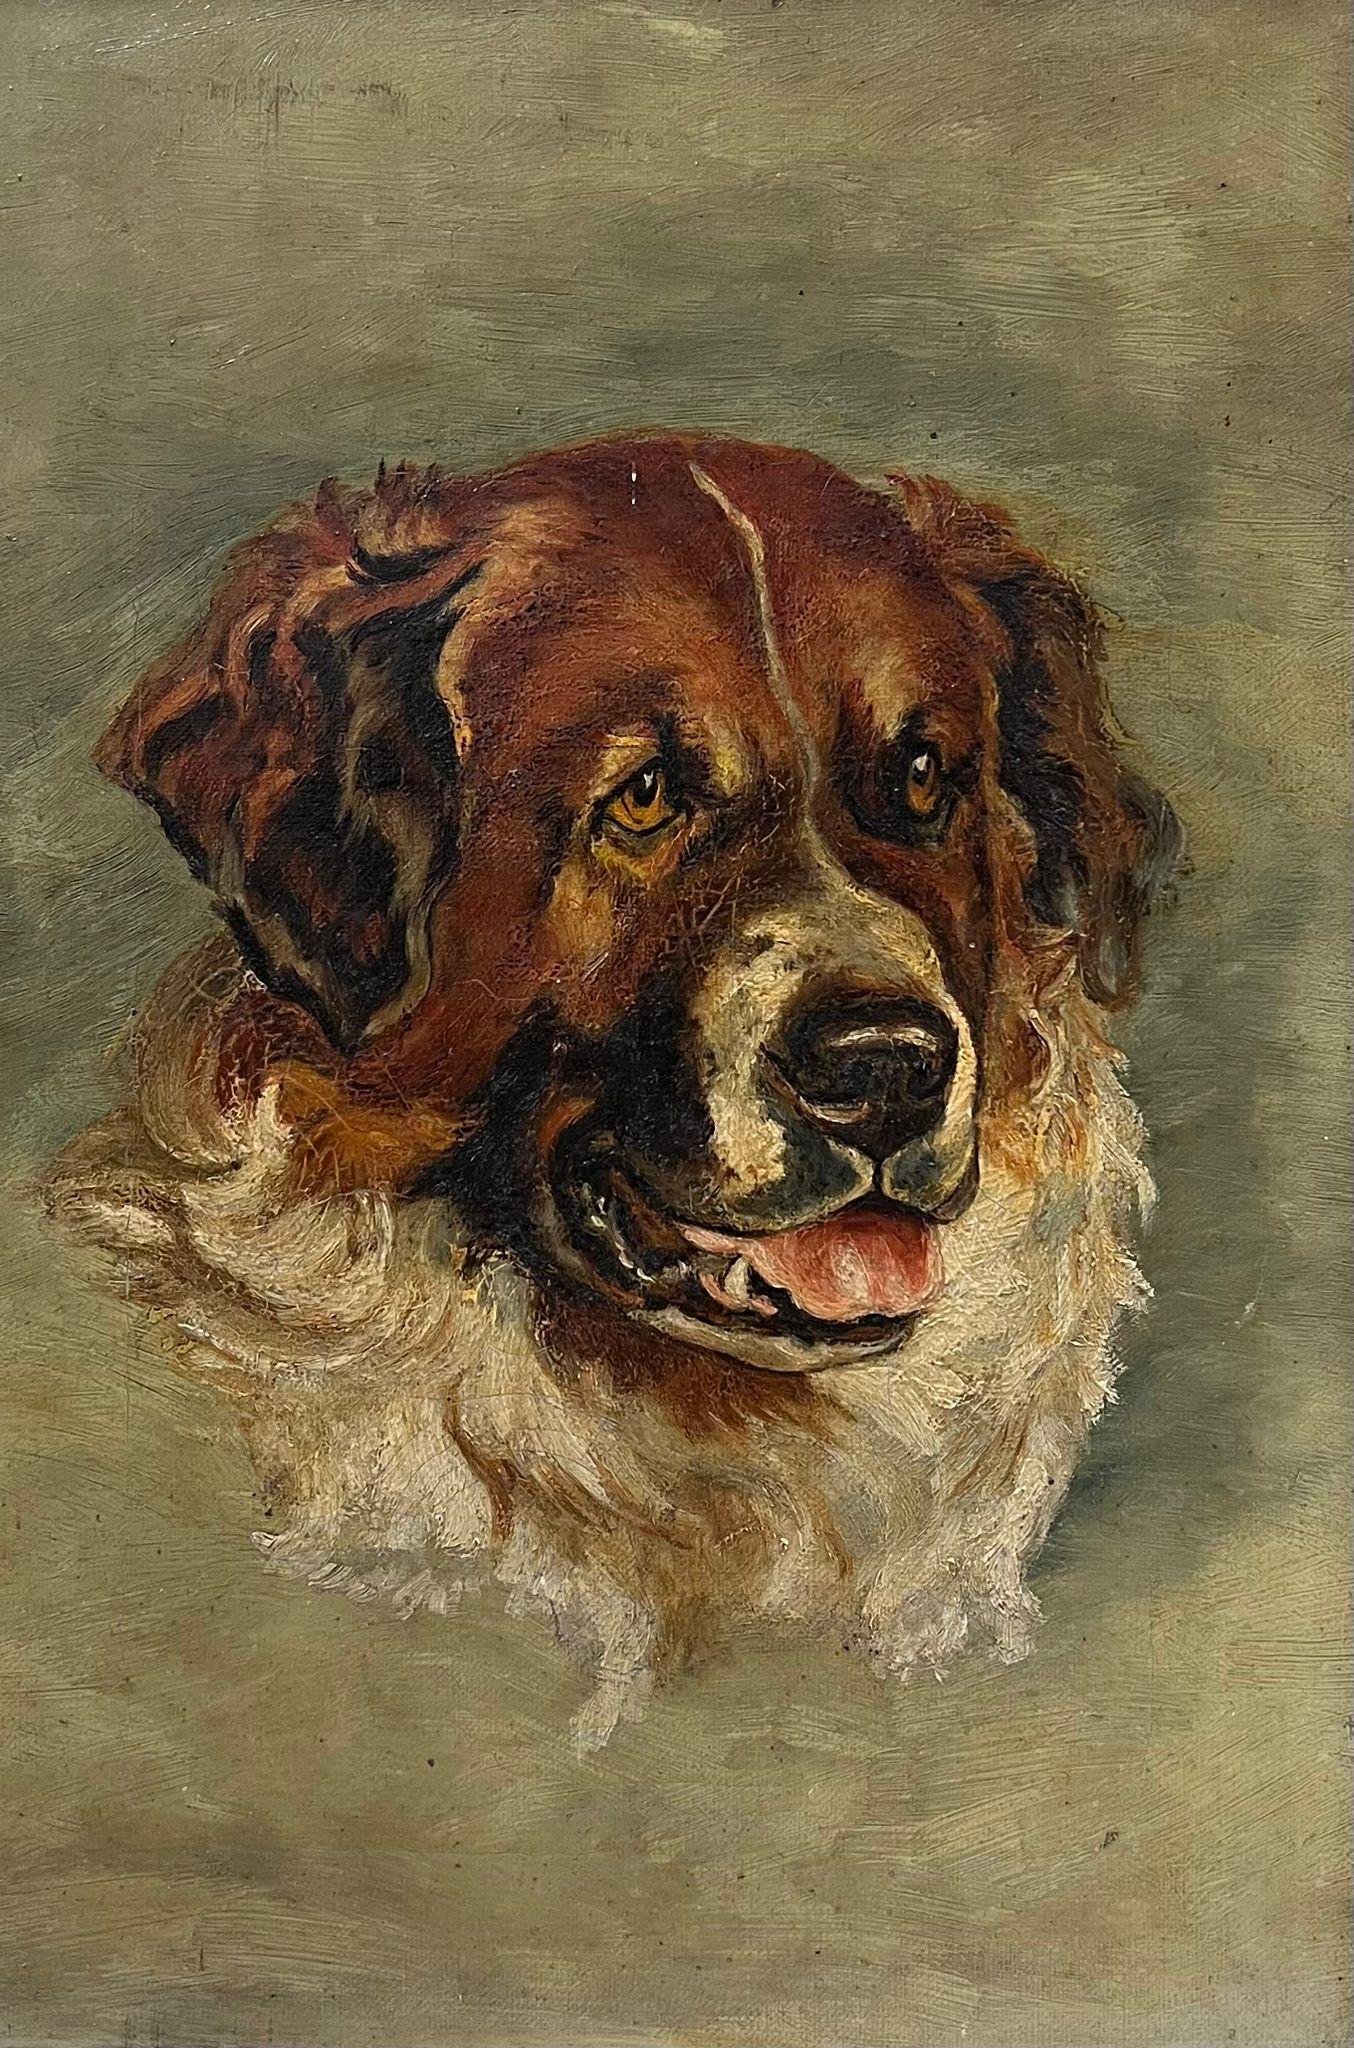 St. Bernard Dog?
English artist, late 19th century
oil on canvas, framed
framed: 19 x 14 inches
canvas : 14 x 10 inches
provenance: private collection, Wiltshire England
condition: very good and sound condition 